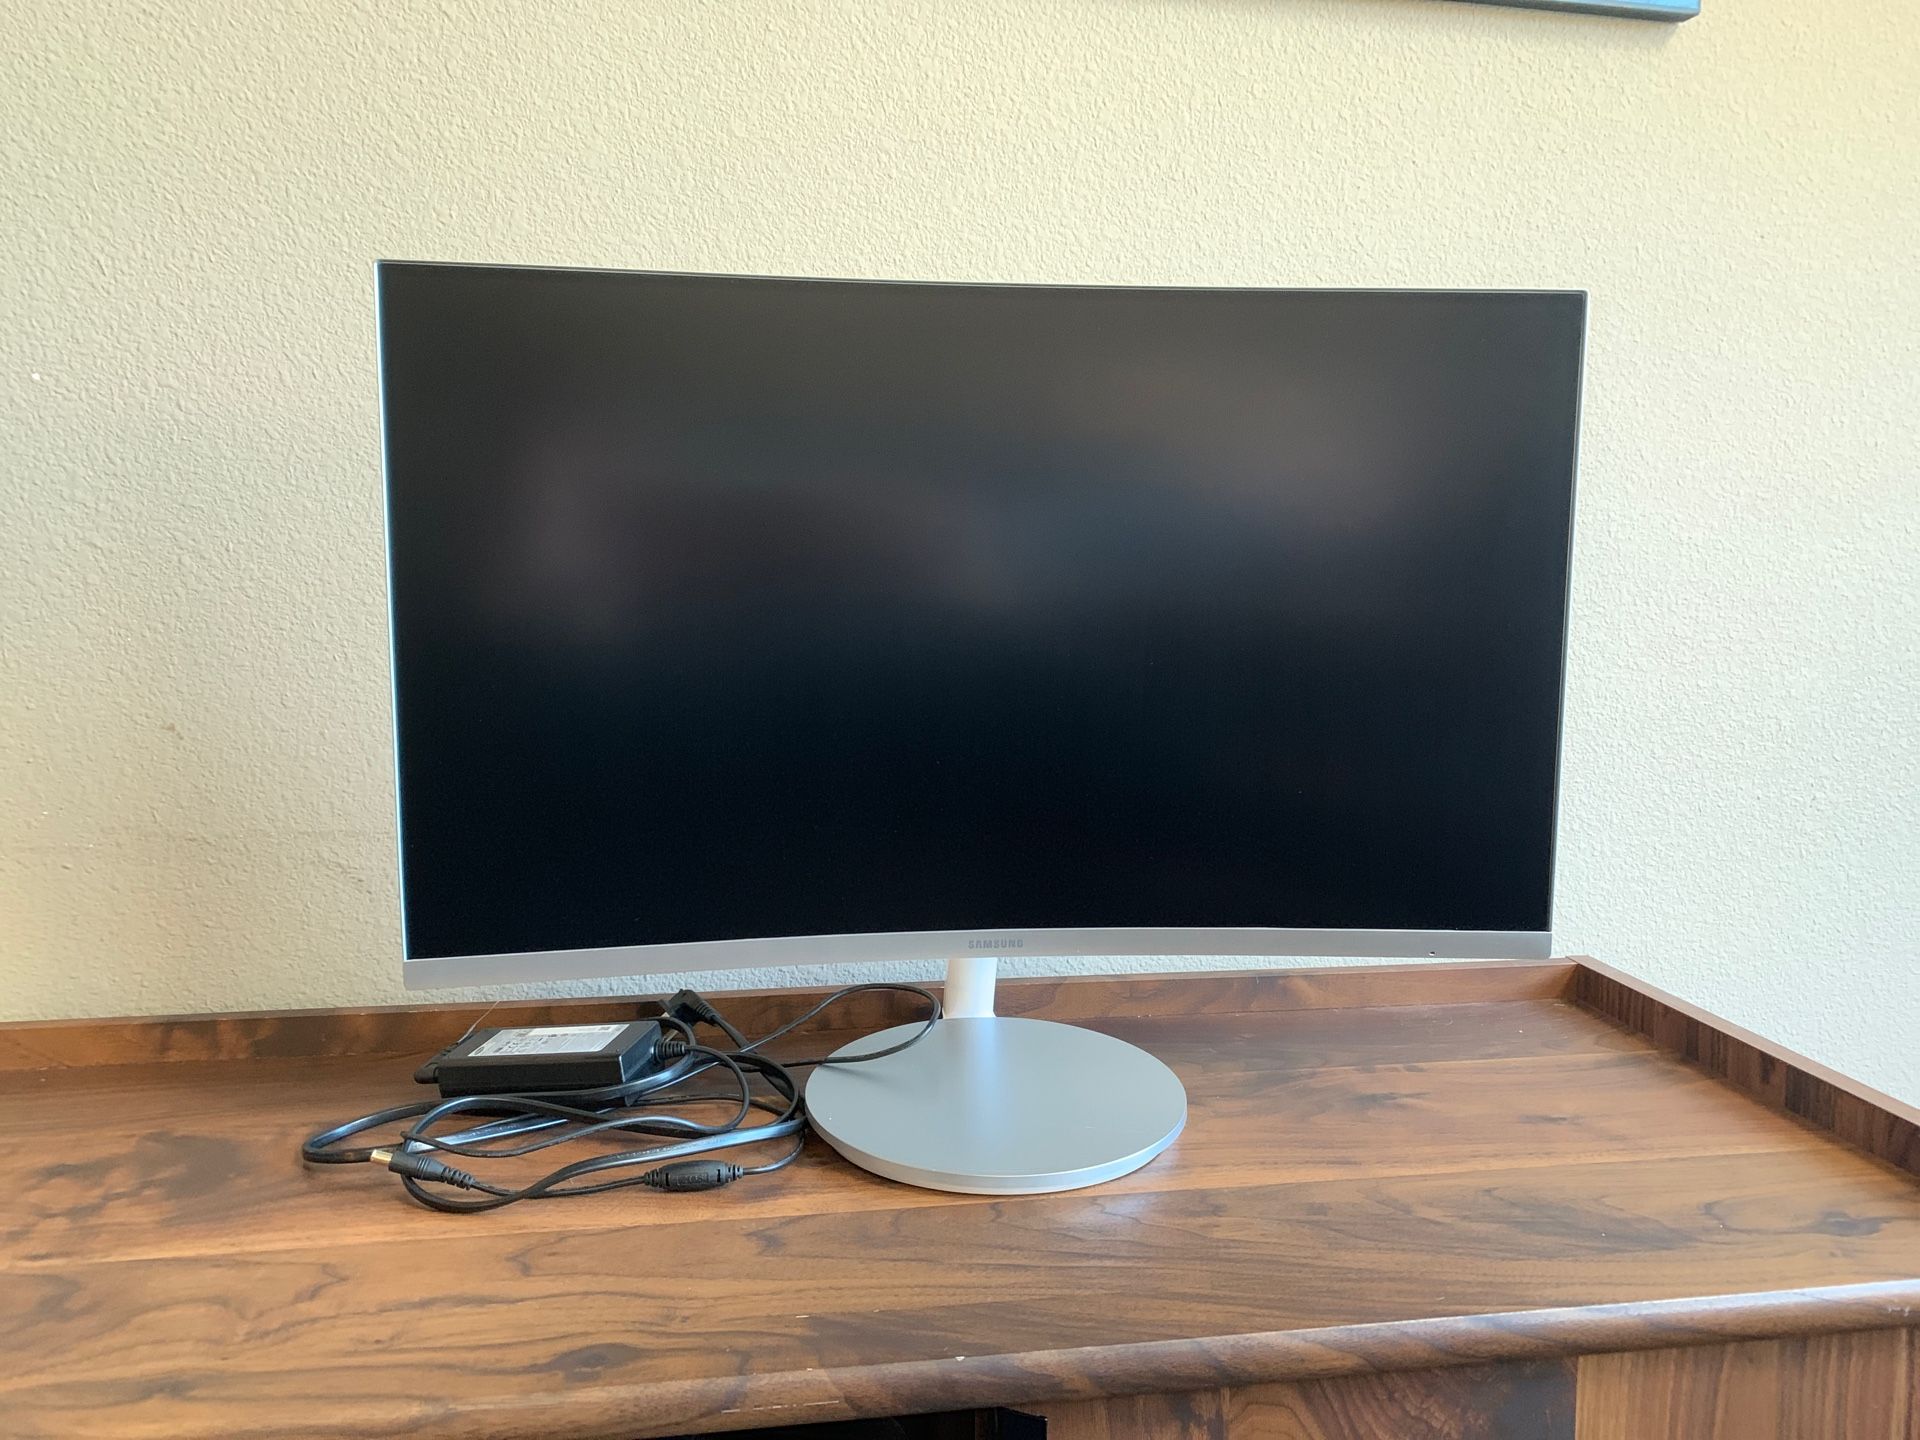 Samsung 1080p HD curved monitor